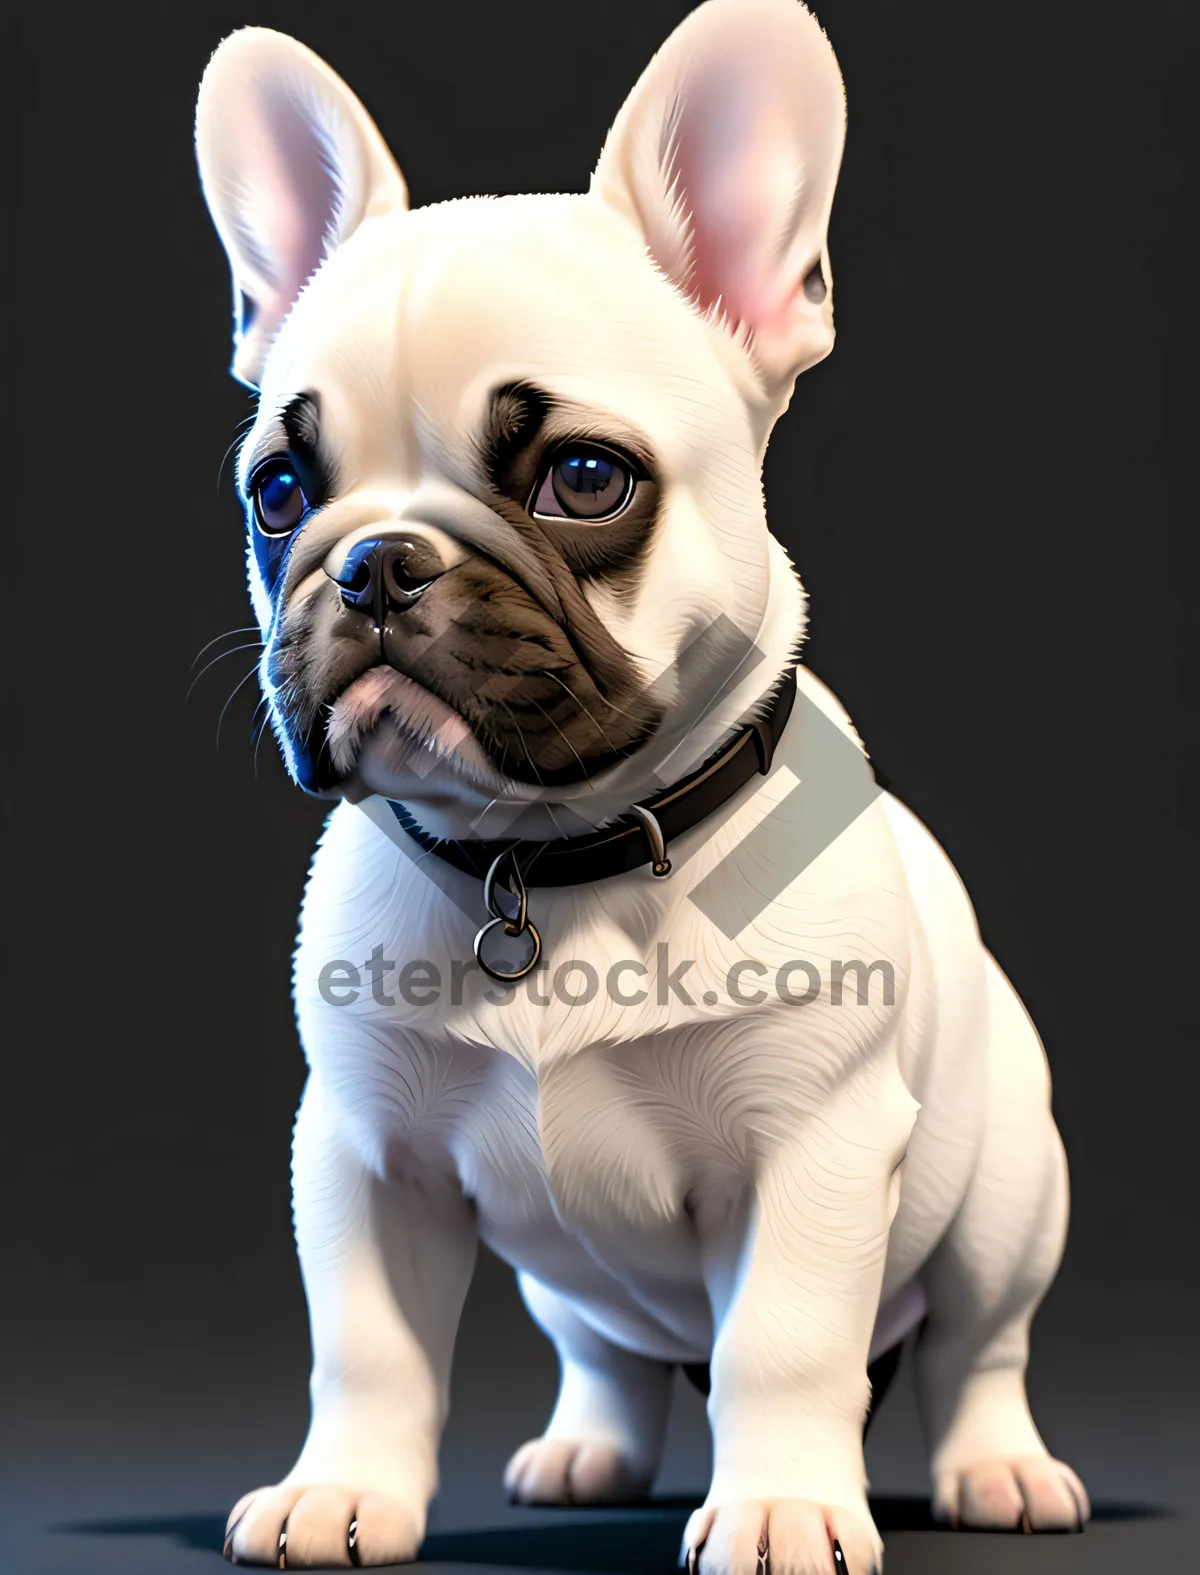 Picture of Delightful studio portrait captures the charm of an adorable bulldog puppy